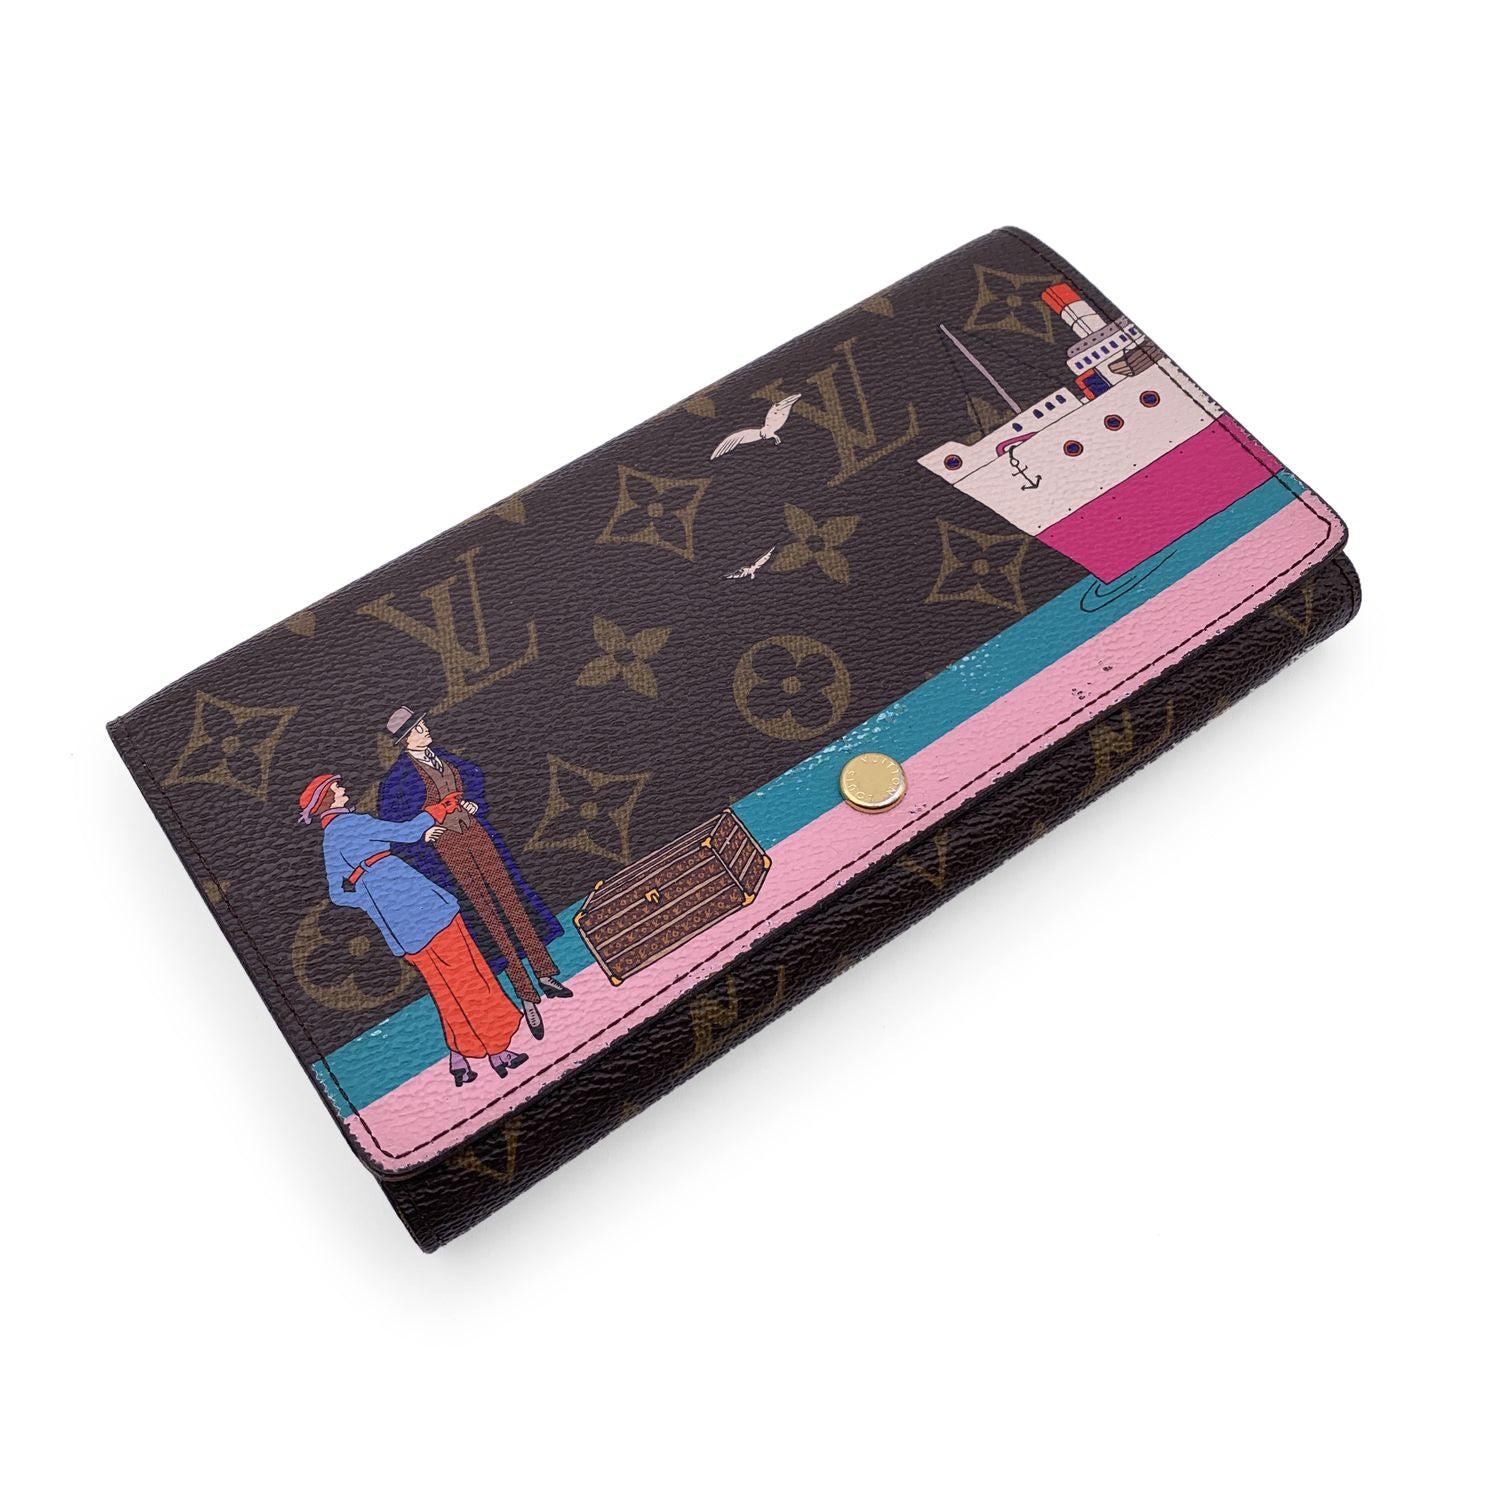 Louis Vuitton 'Sarah' wallet, Limited edition 'Illustre Transatlantic', from the 2016. The wallet is carfted in timeless monogram canvas and it features a multicolor print on the front representing a couple watching a cruise ship with their Louis